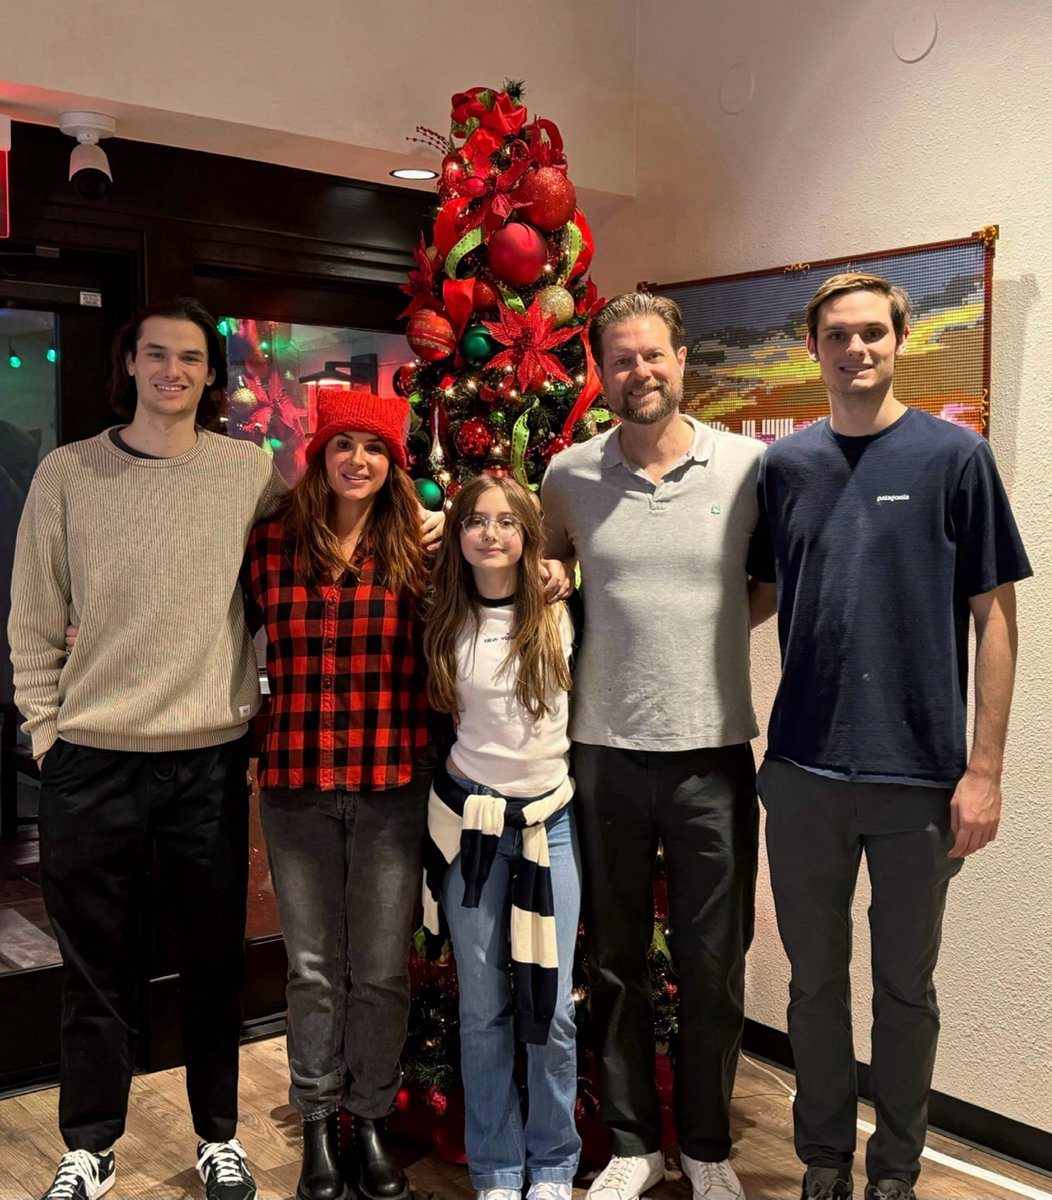 We had the privilege of spending Christmas Eve at The Ronald McDonald House, where we had the honor of serving dinners to the families staying there. The holiday season can be challenging for many, but being able to contribute in our own small way brings immense solace. On behalf